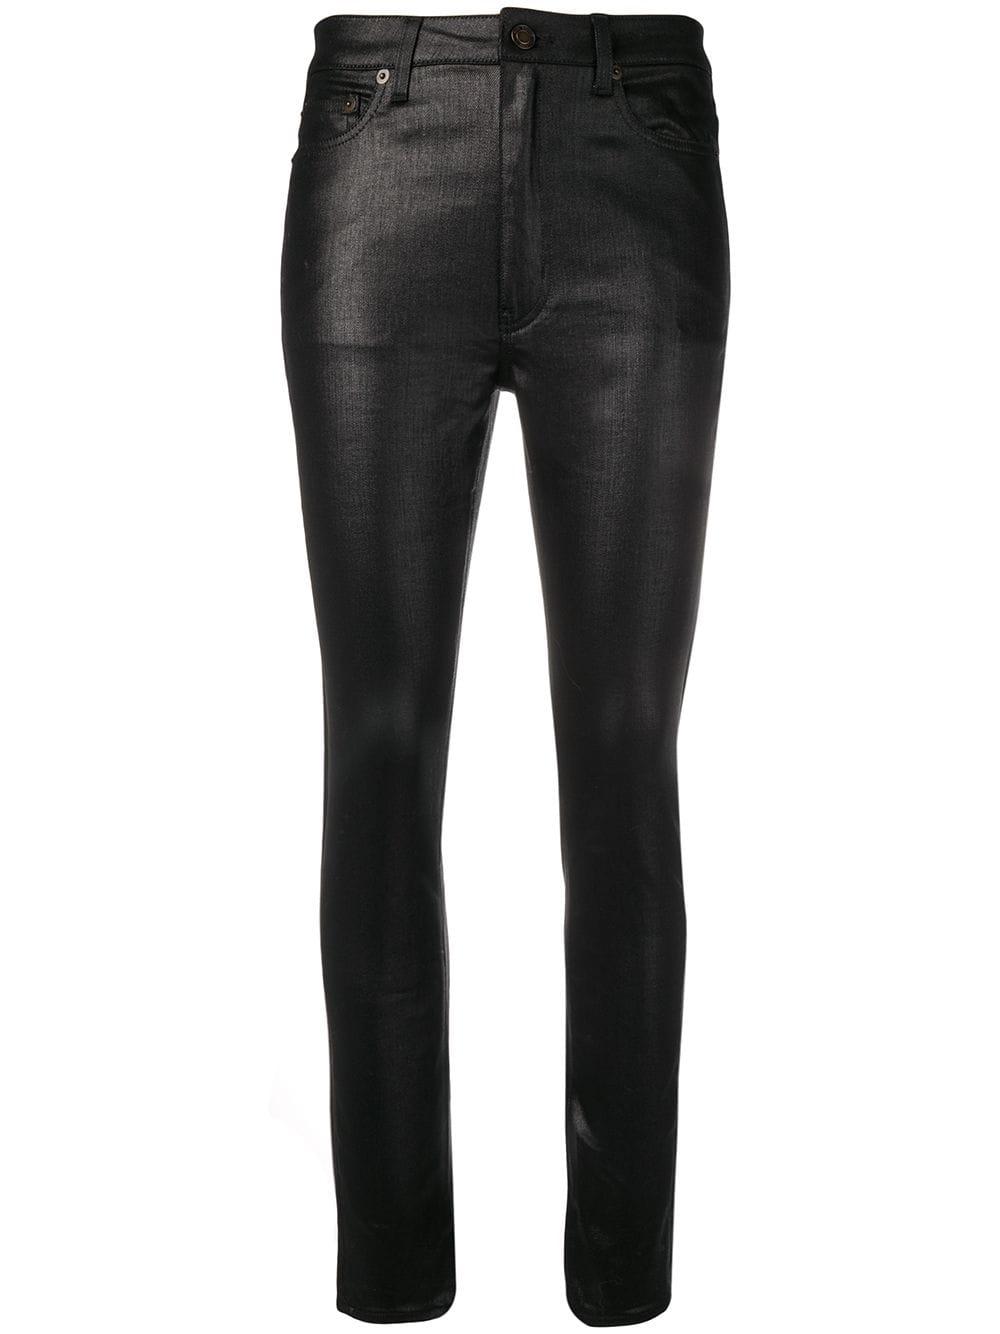 Saint Laurent Synthetic Coated Skinny Jeans in Black - Lyst